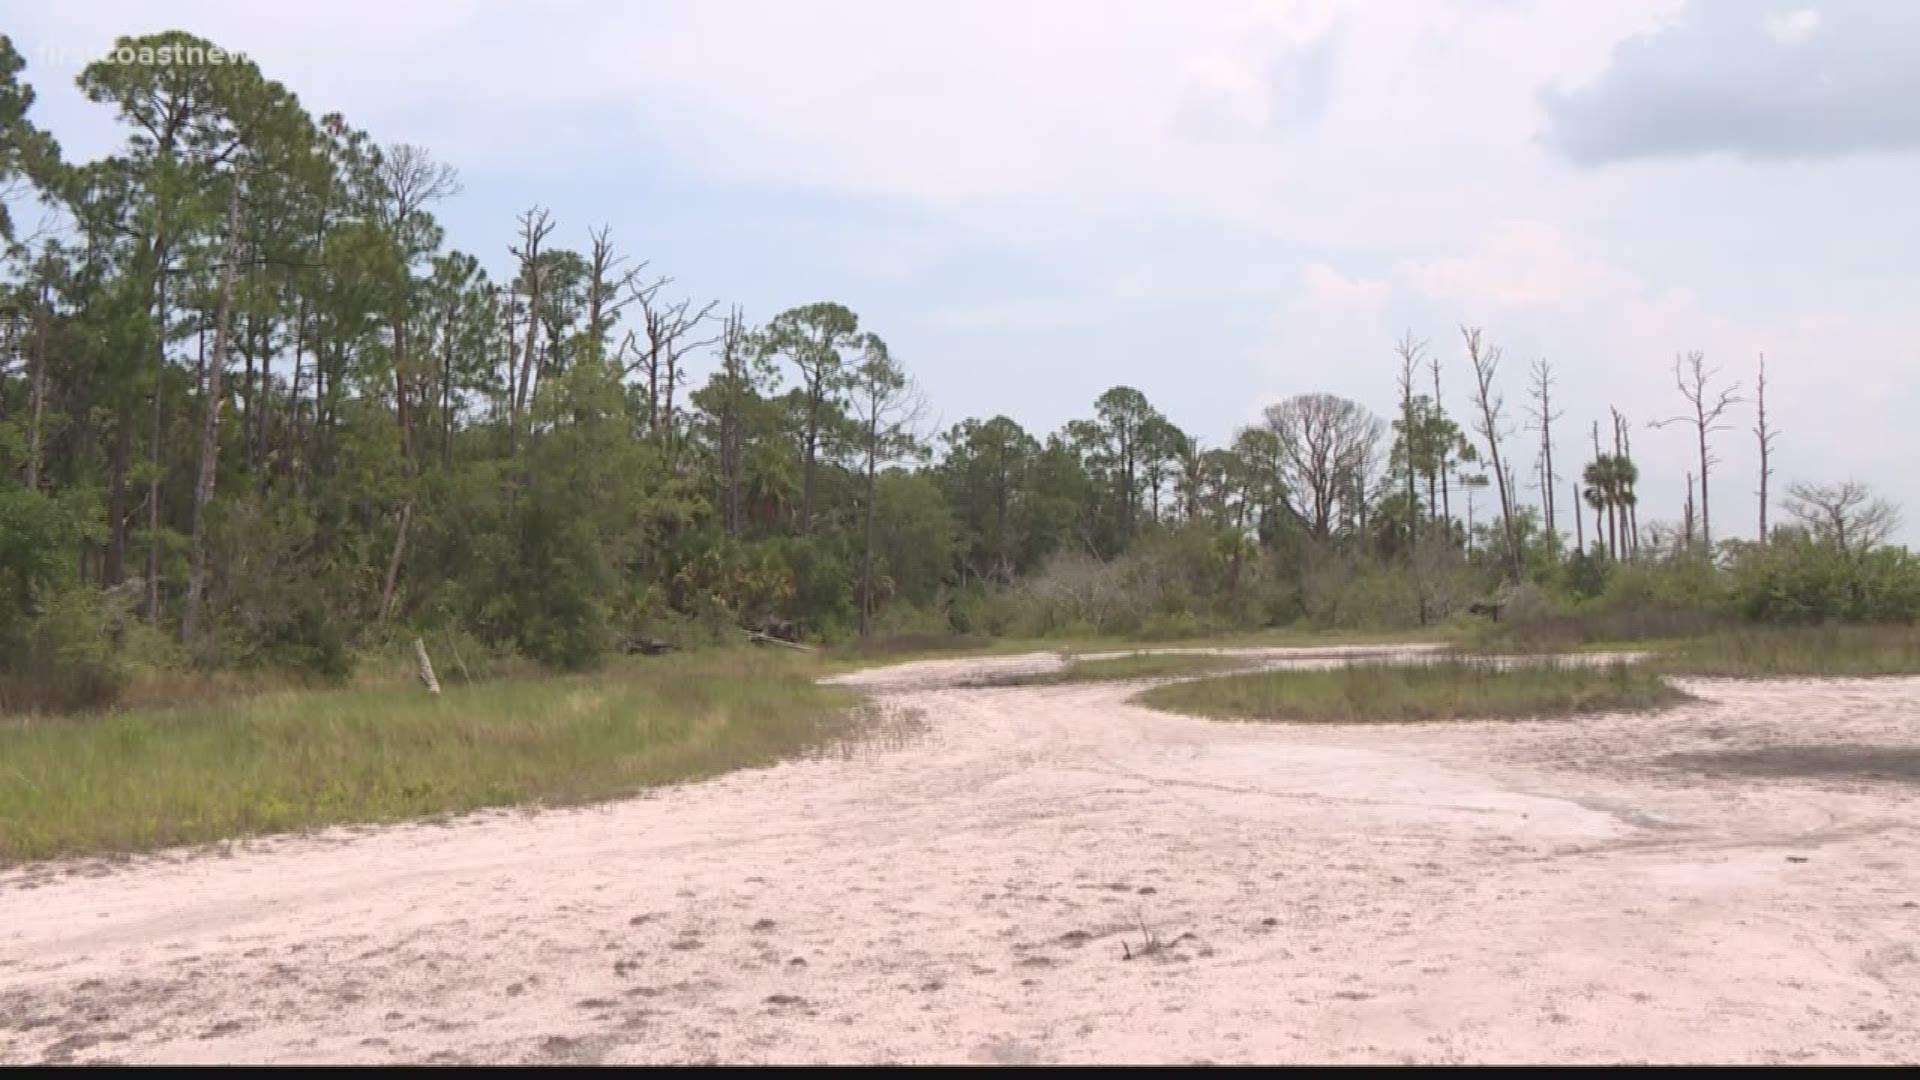 Many people demanded Fish Island in St. Augustine be saved from bulldozers in the past year. It is part of Anastasia Island. The 57 acres sit on the eastern side of the 312 Bridge, right on the Intracoastal Waterway.